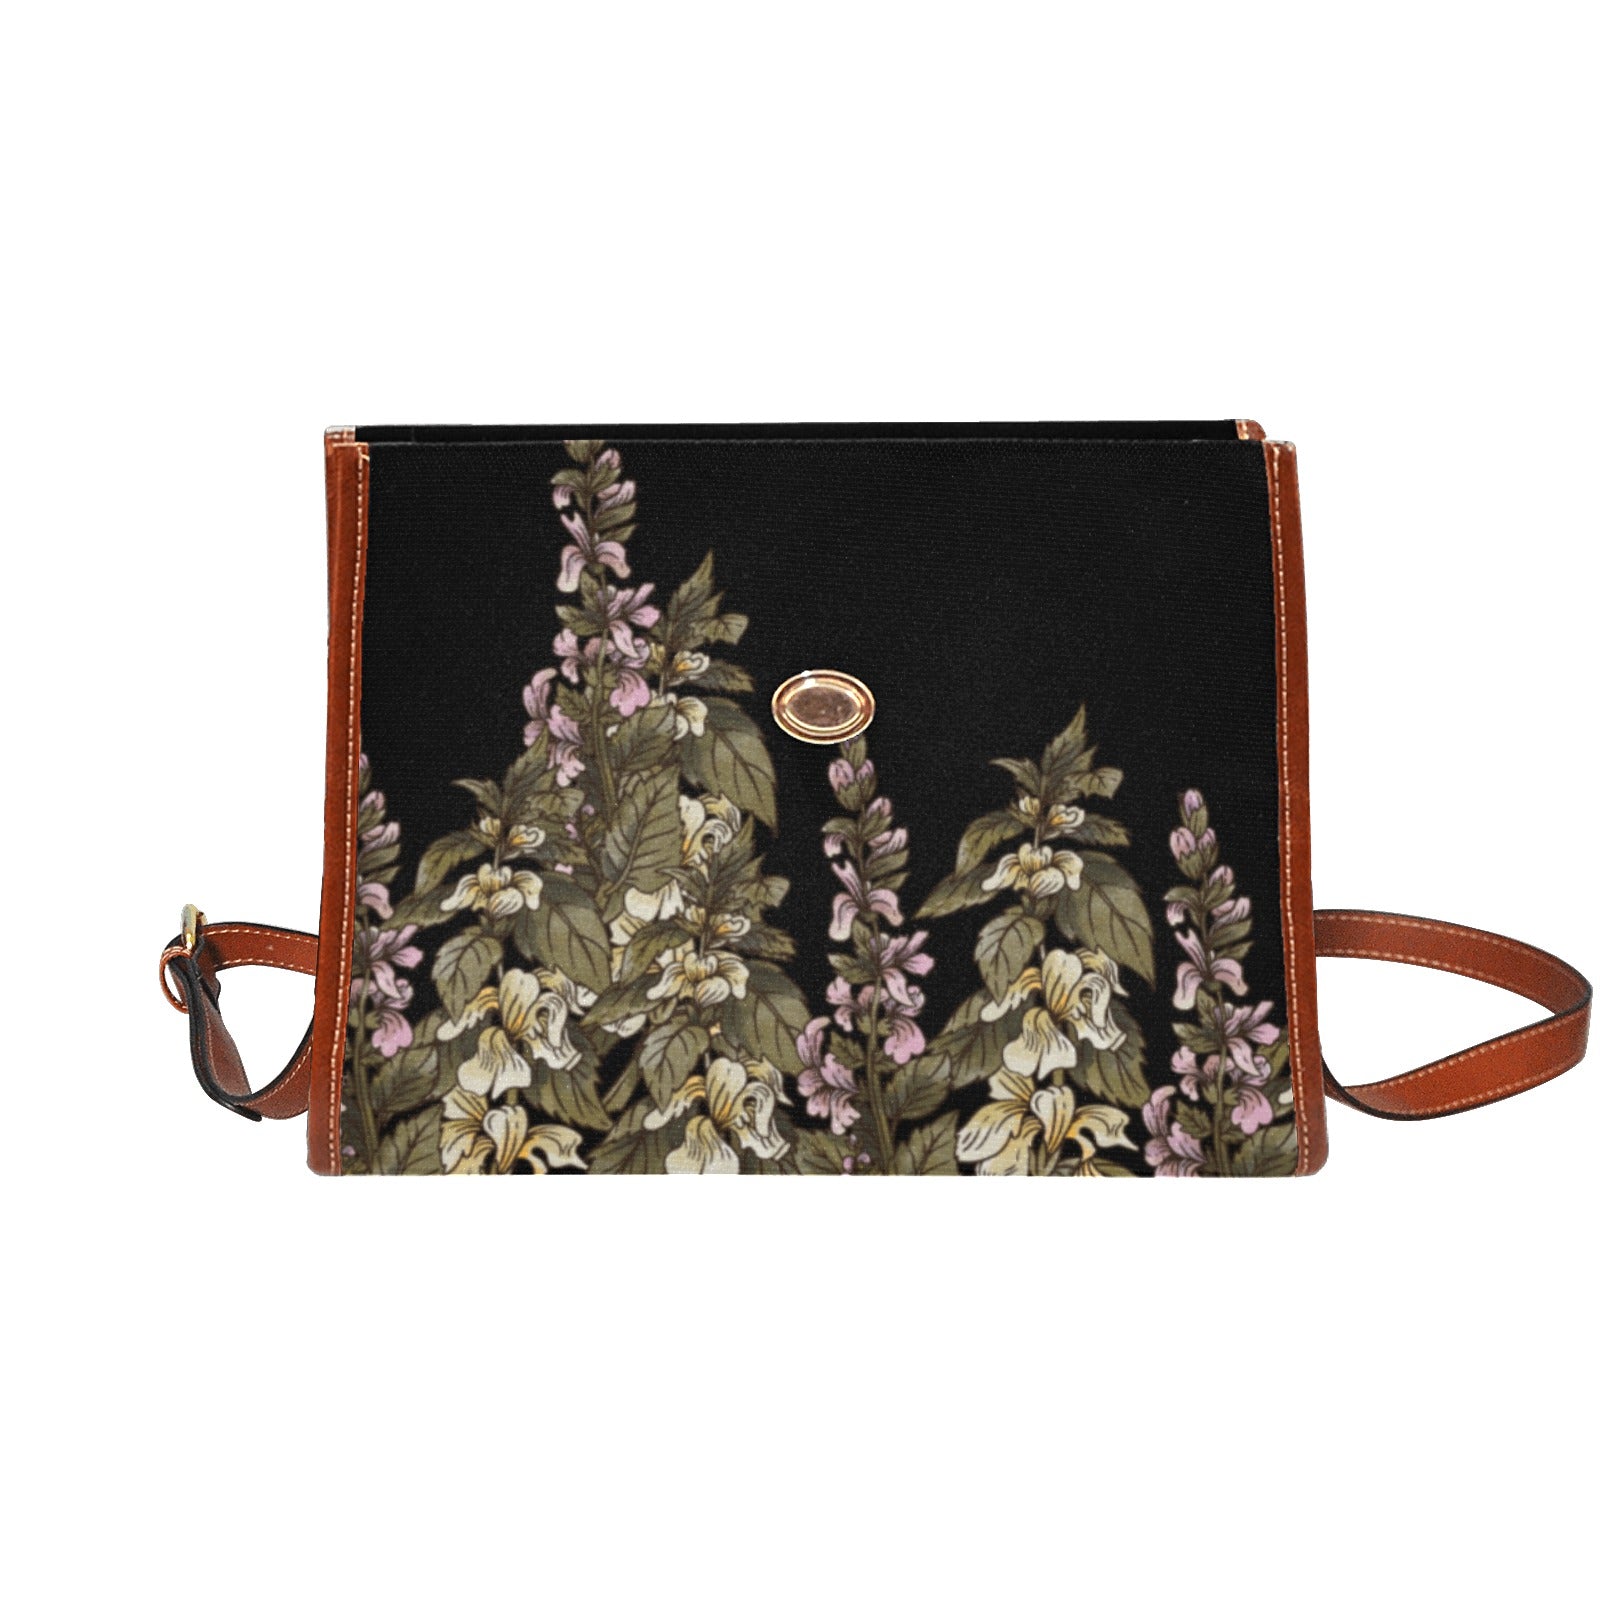 Cottagecore Witch Wild Flower witchy forest Canvas satchel bag